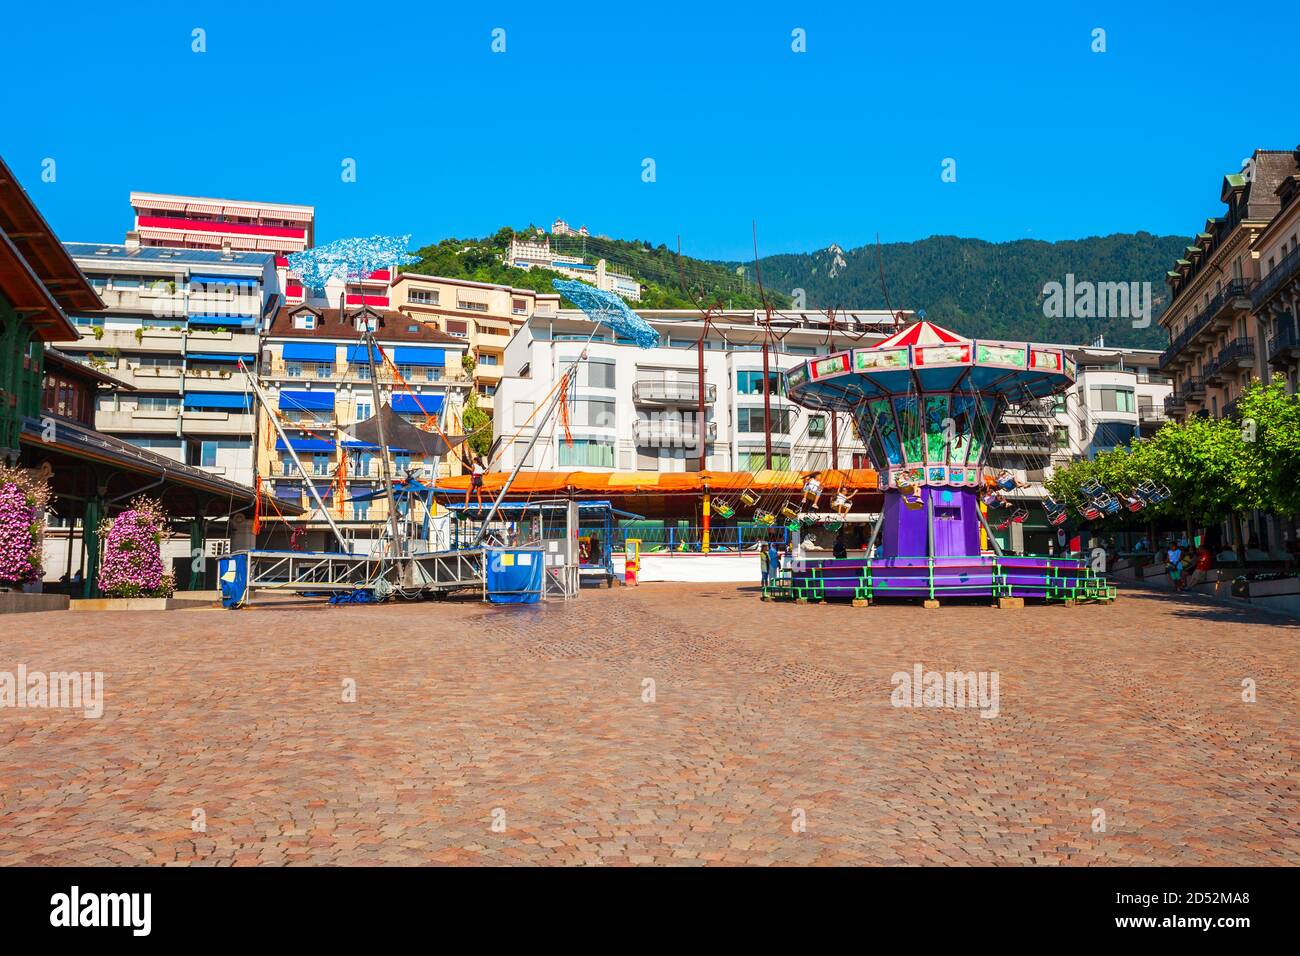 MONTREAUX, SWITZERLAND - JULY 19, 2019: Carousel in the centre of Montreaux. Montreux is a town on the shoreline of Lake Geneva at the foot of the Alp Stock Photo